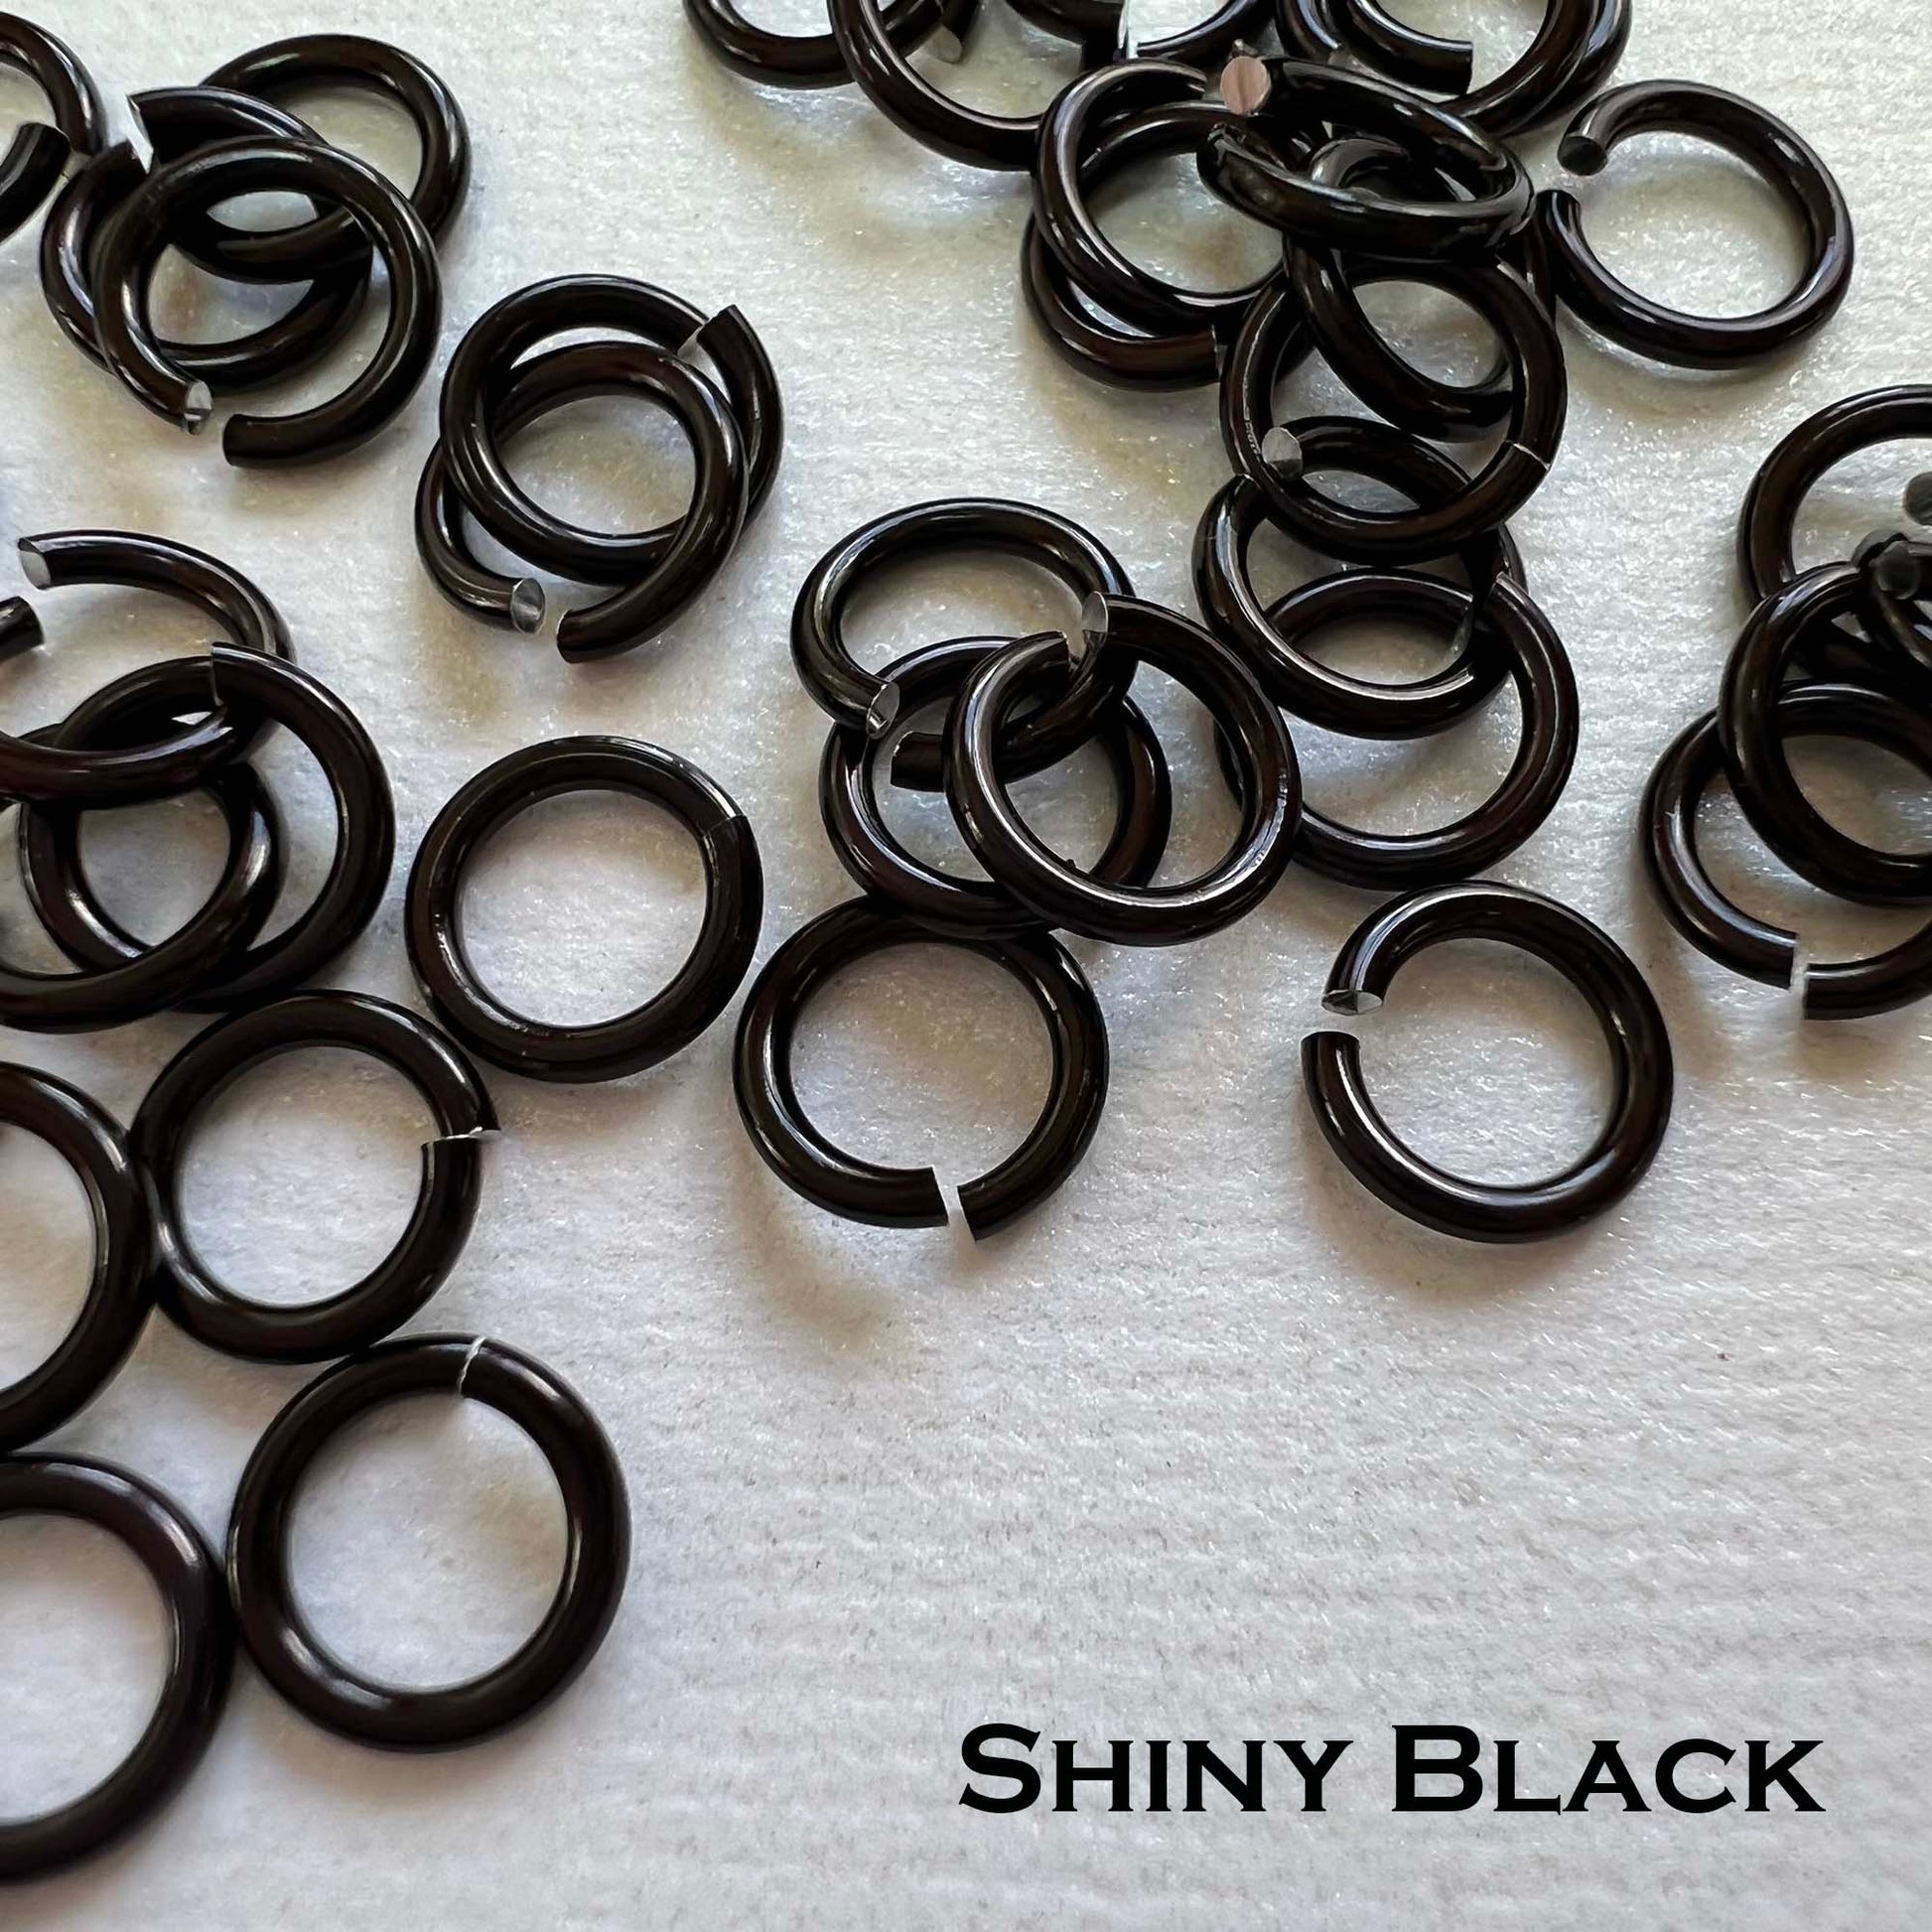 100, 500 or 1,000 Pieces: 10 mm Gunmetal Open Jump Rings, 18g